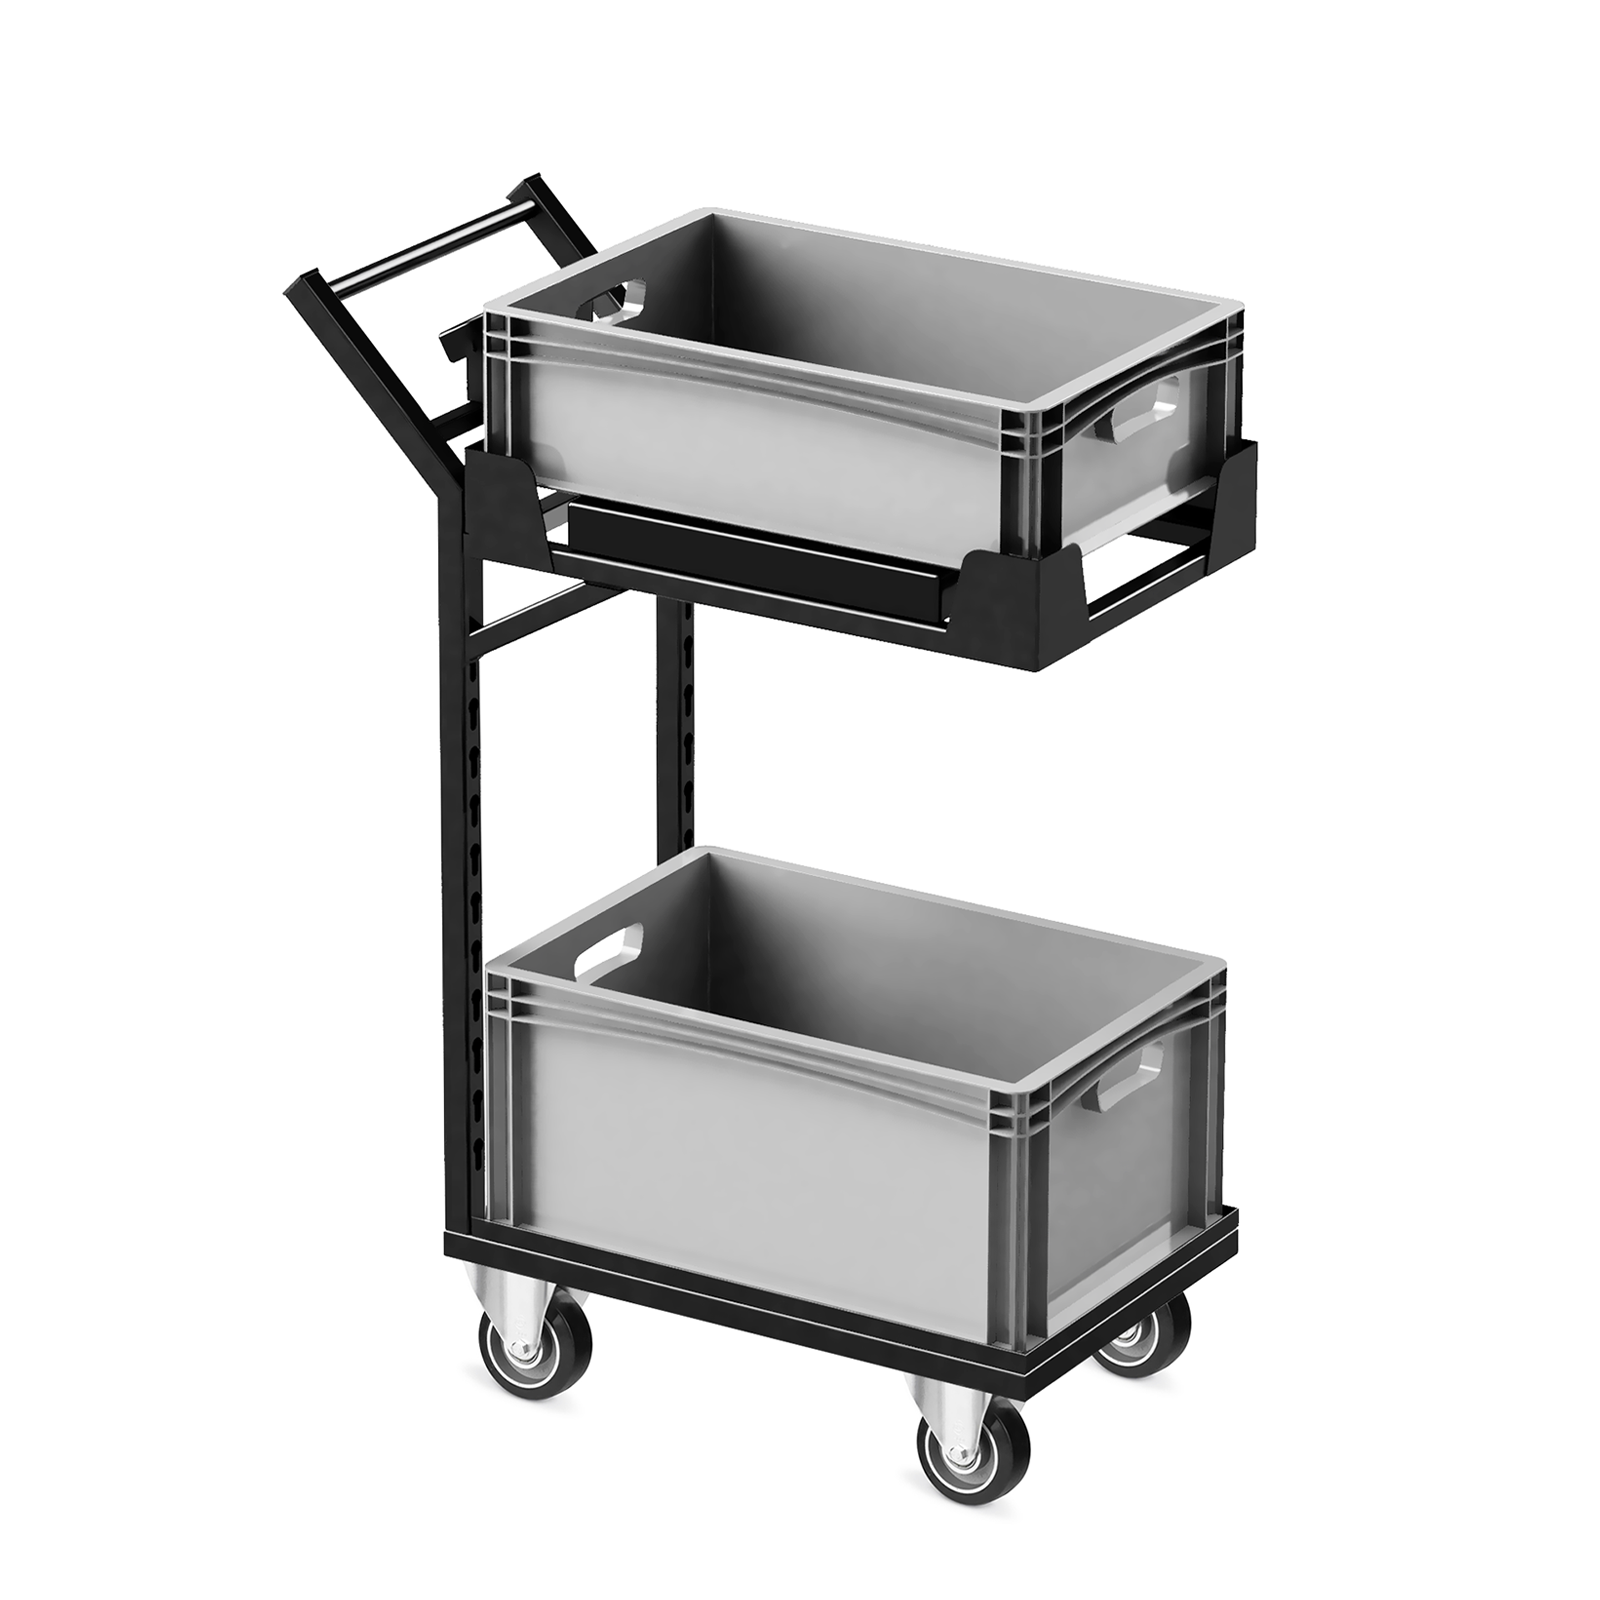 Warehouse trolley for container / cuvette transport with built-in scale